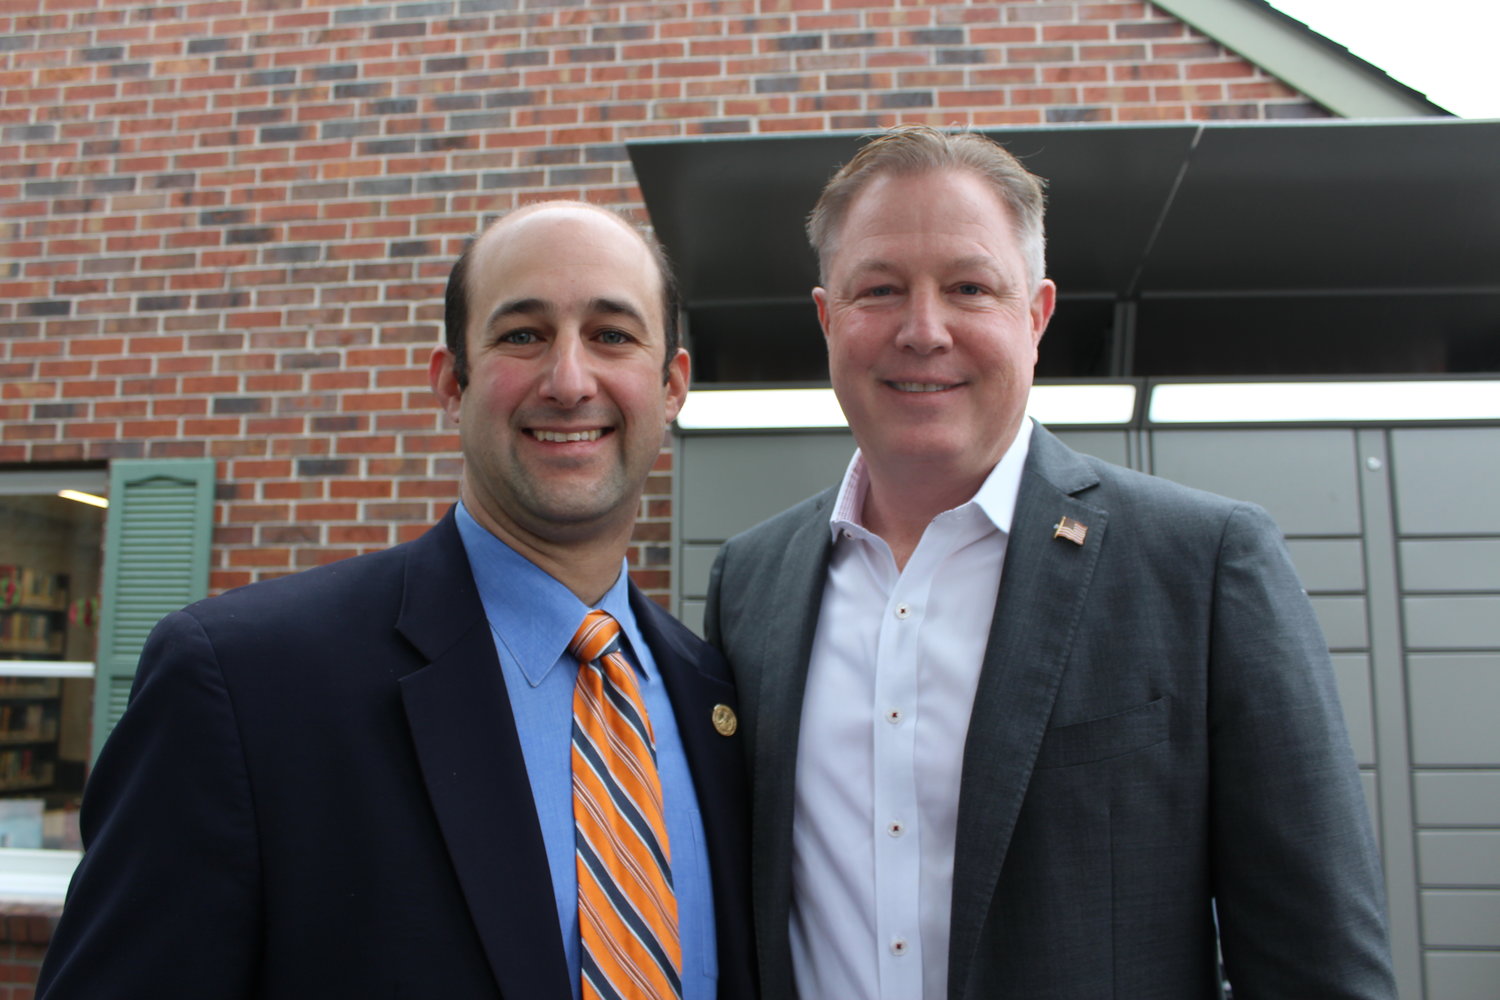 Democrat Suffolk County Legis. Rob Calarco and Republican Brookhaven Town councilman Neil Foley have worked together on 20 projects in the area over the years, proving bipartisan collaboration does work.